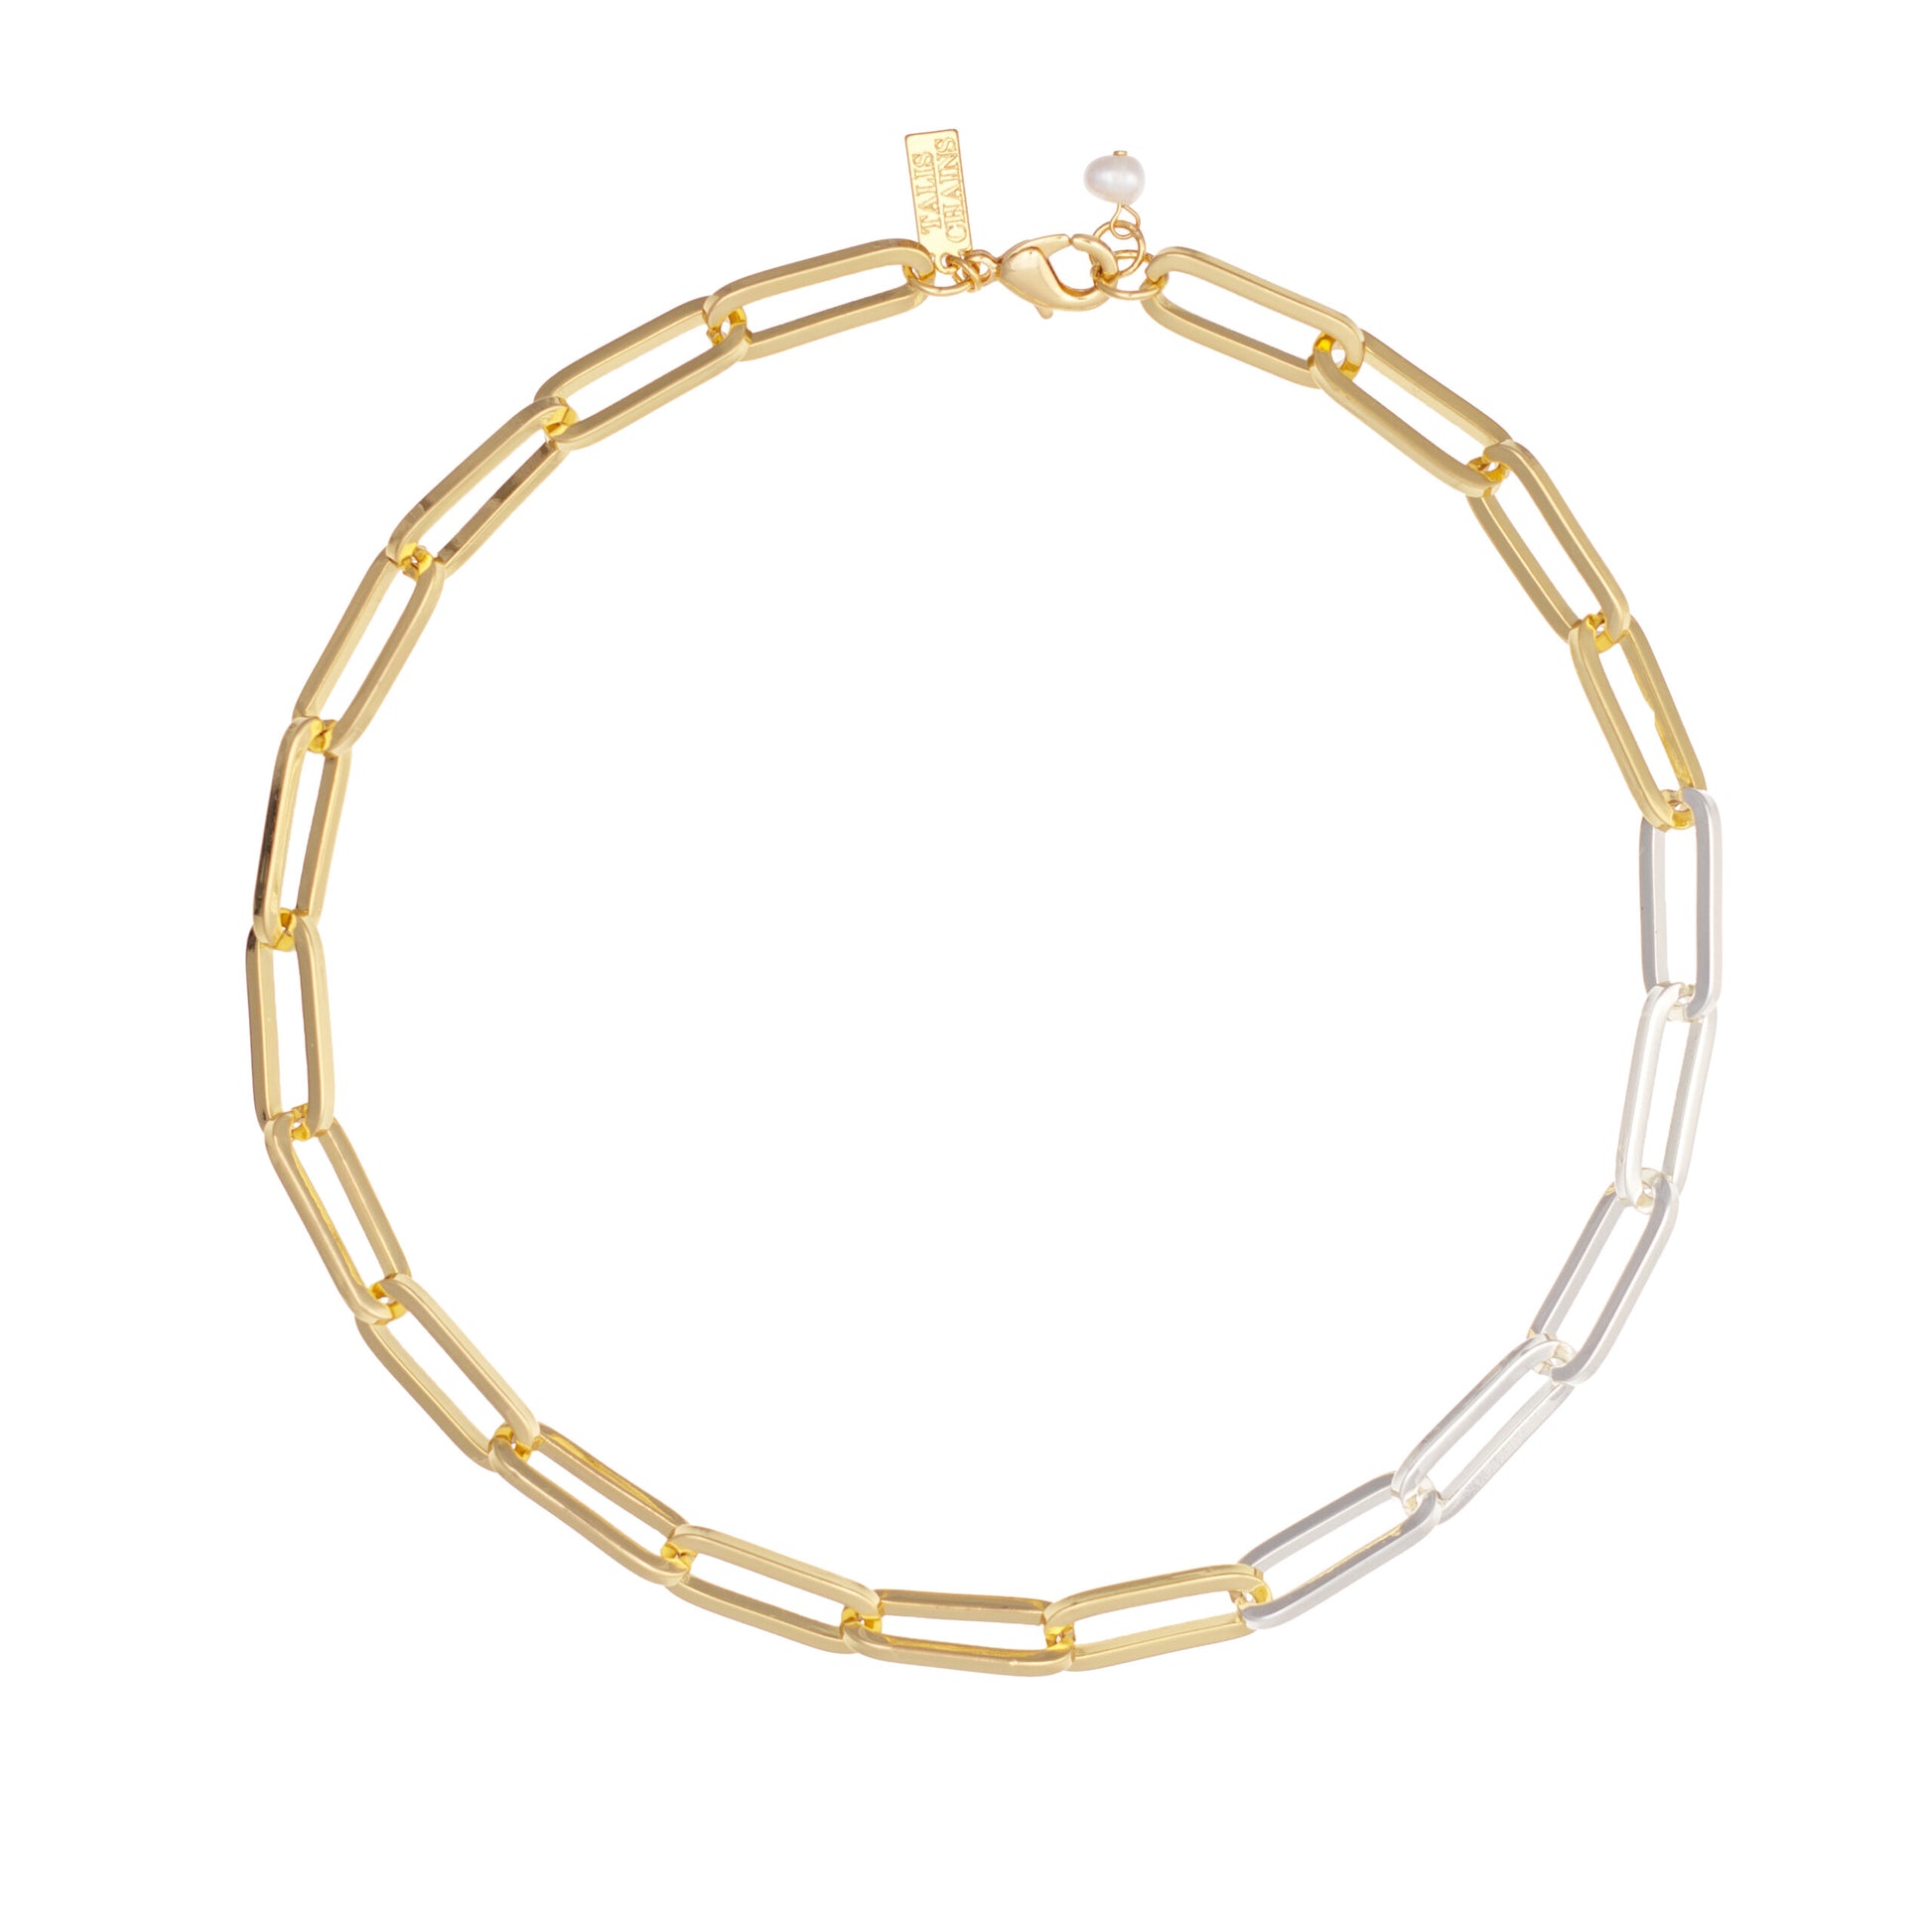 This Duo chain necklace from Talis Chains is the epitome of chic. With the mix of gold and silver links, its the perfect way to try on the mixed metal trend. Pair with the Claw Earrings for a finishing touch.